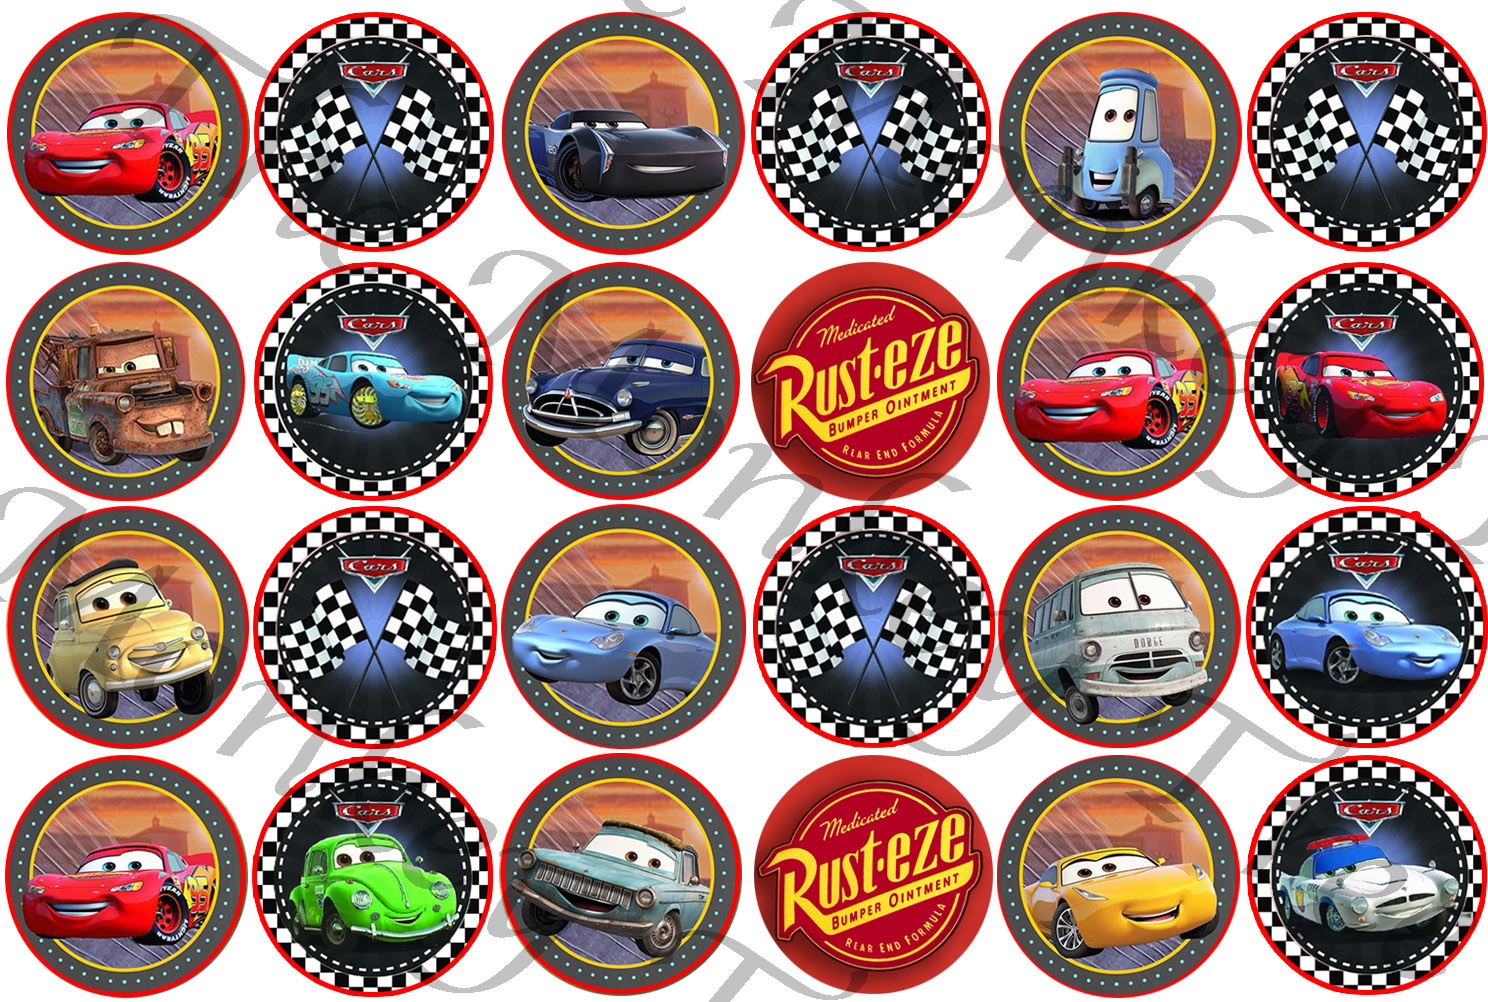 disney-cars-themed-edible-cupcake-images-set-of-24-the-monkey-tree